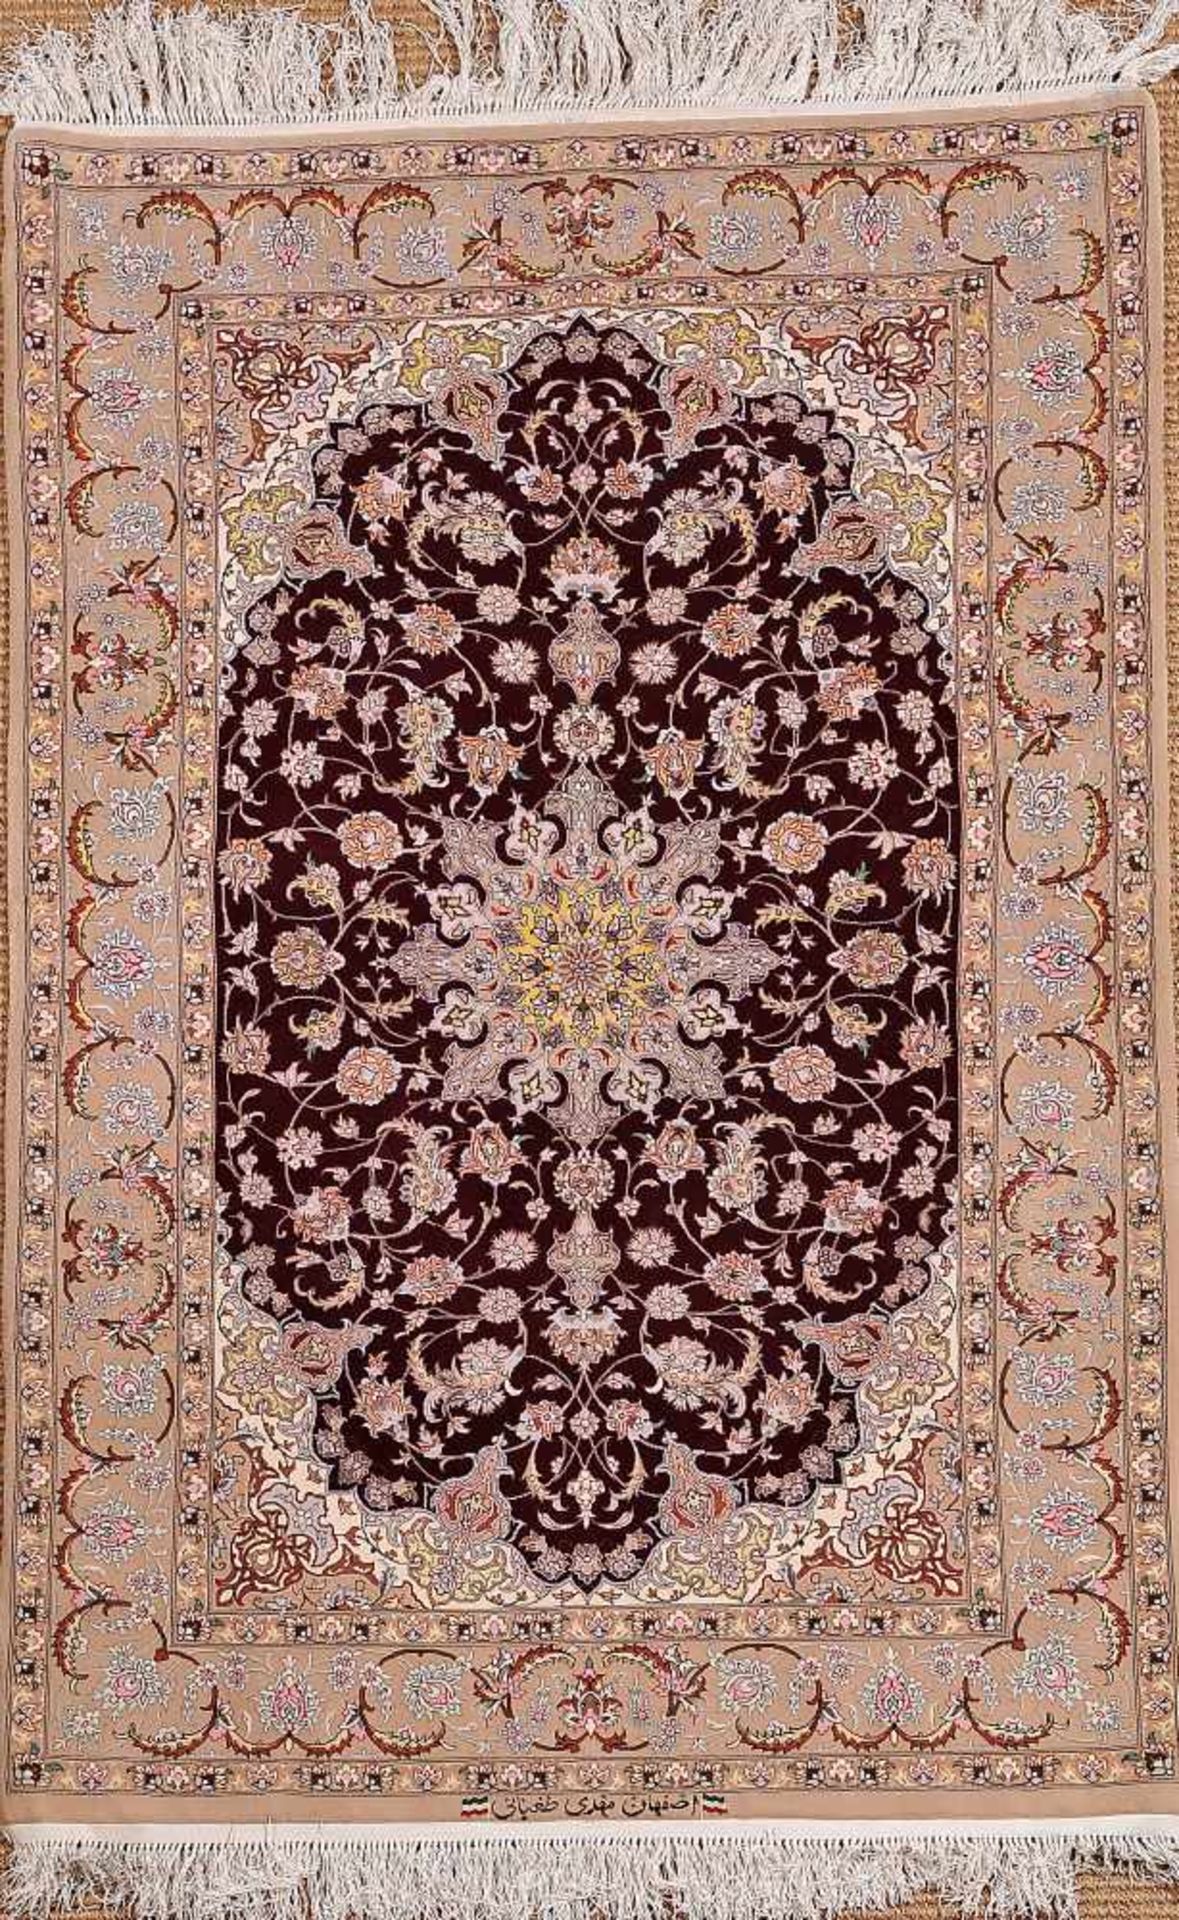 A "Isfahan" Carpet, silk and wool yarn, polychrome decoration "Flower", Iranian, 20th/21st C., signs